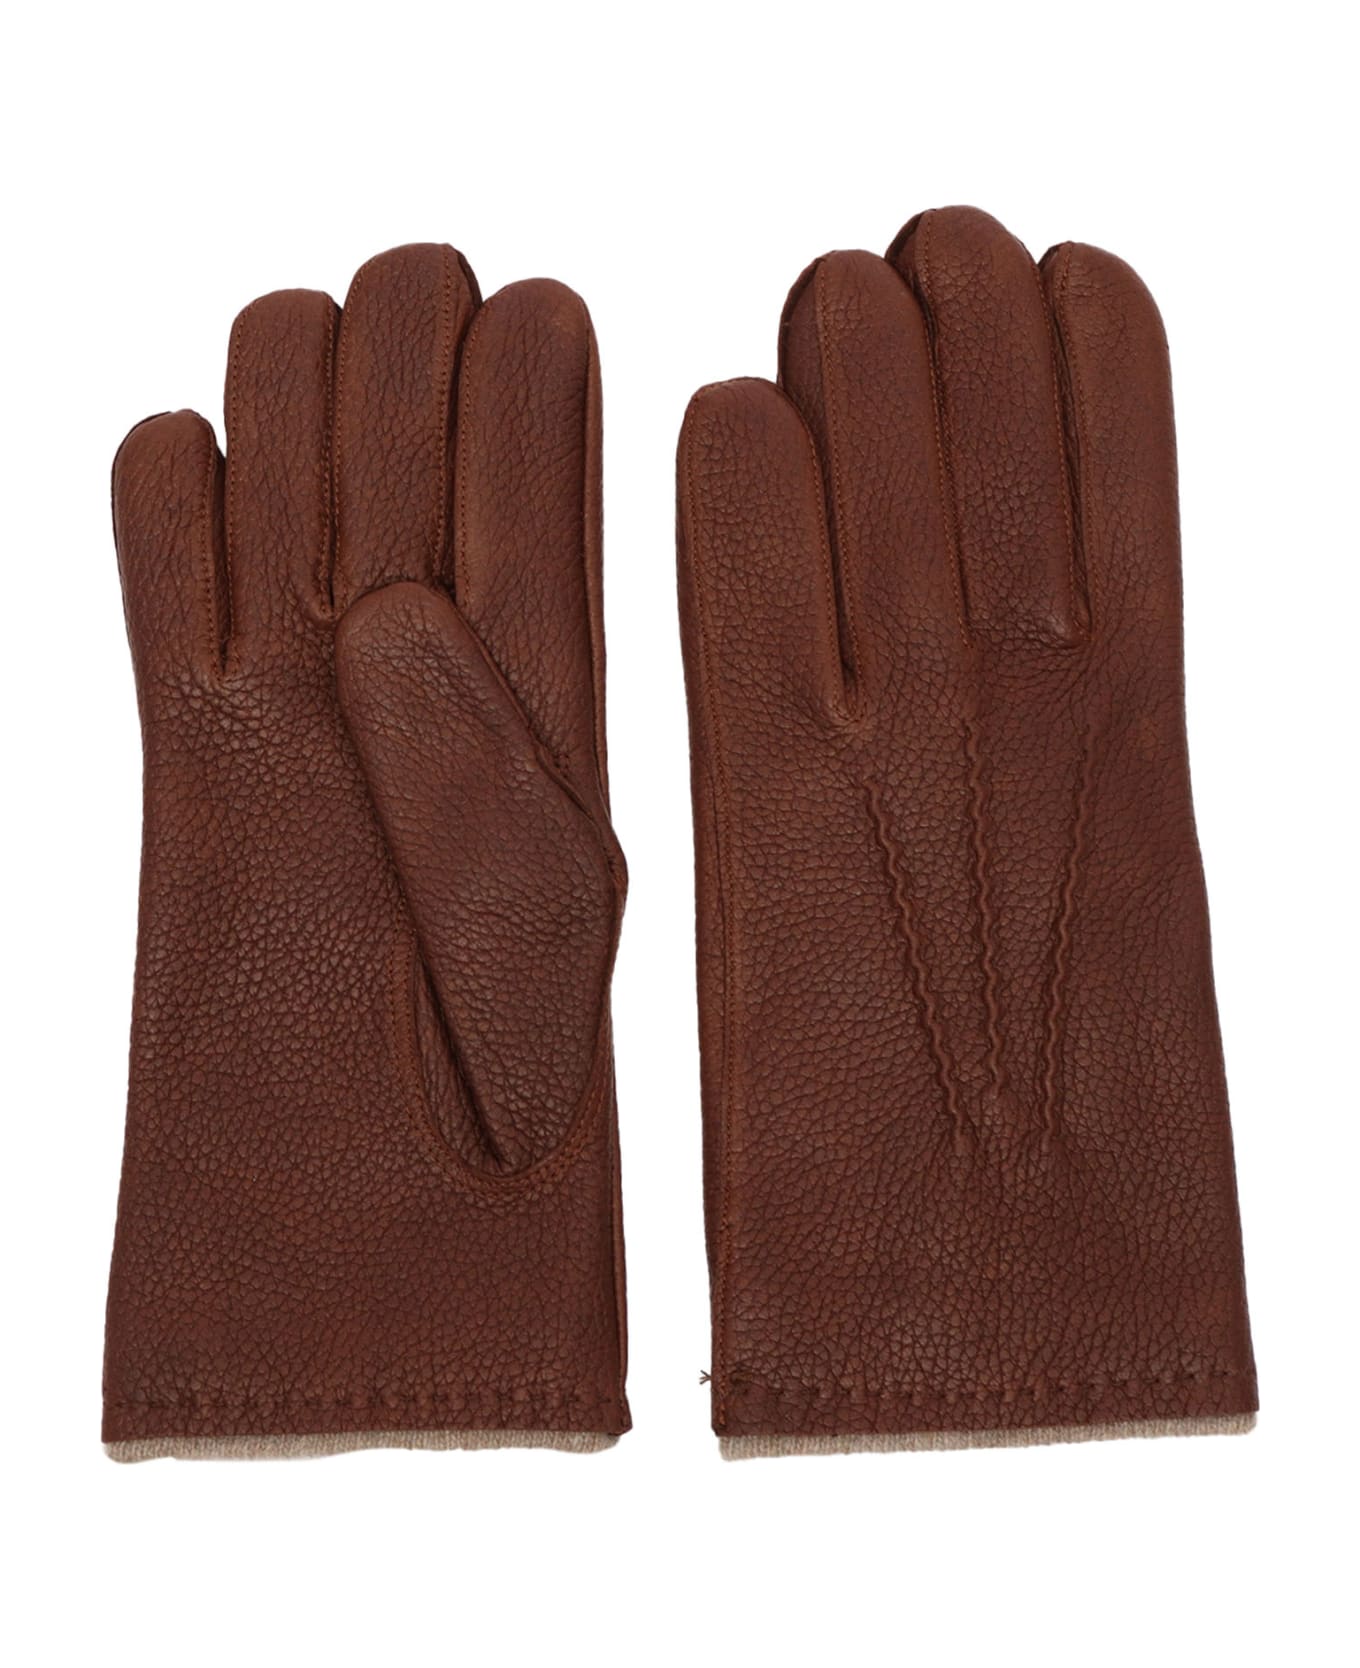 Orciani Grained Leather Gloves - BROWN 手袋